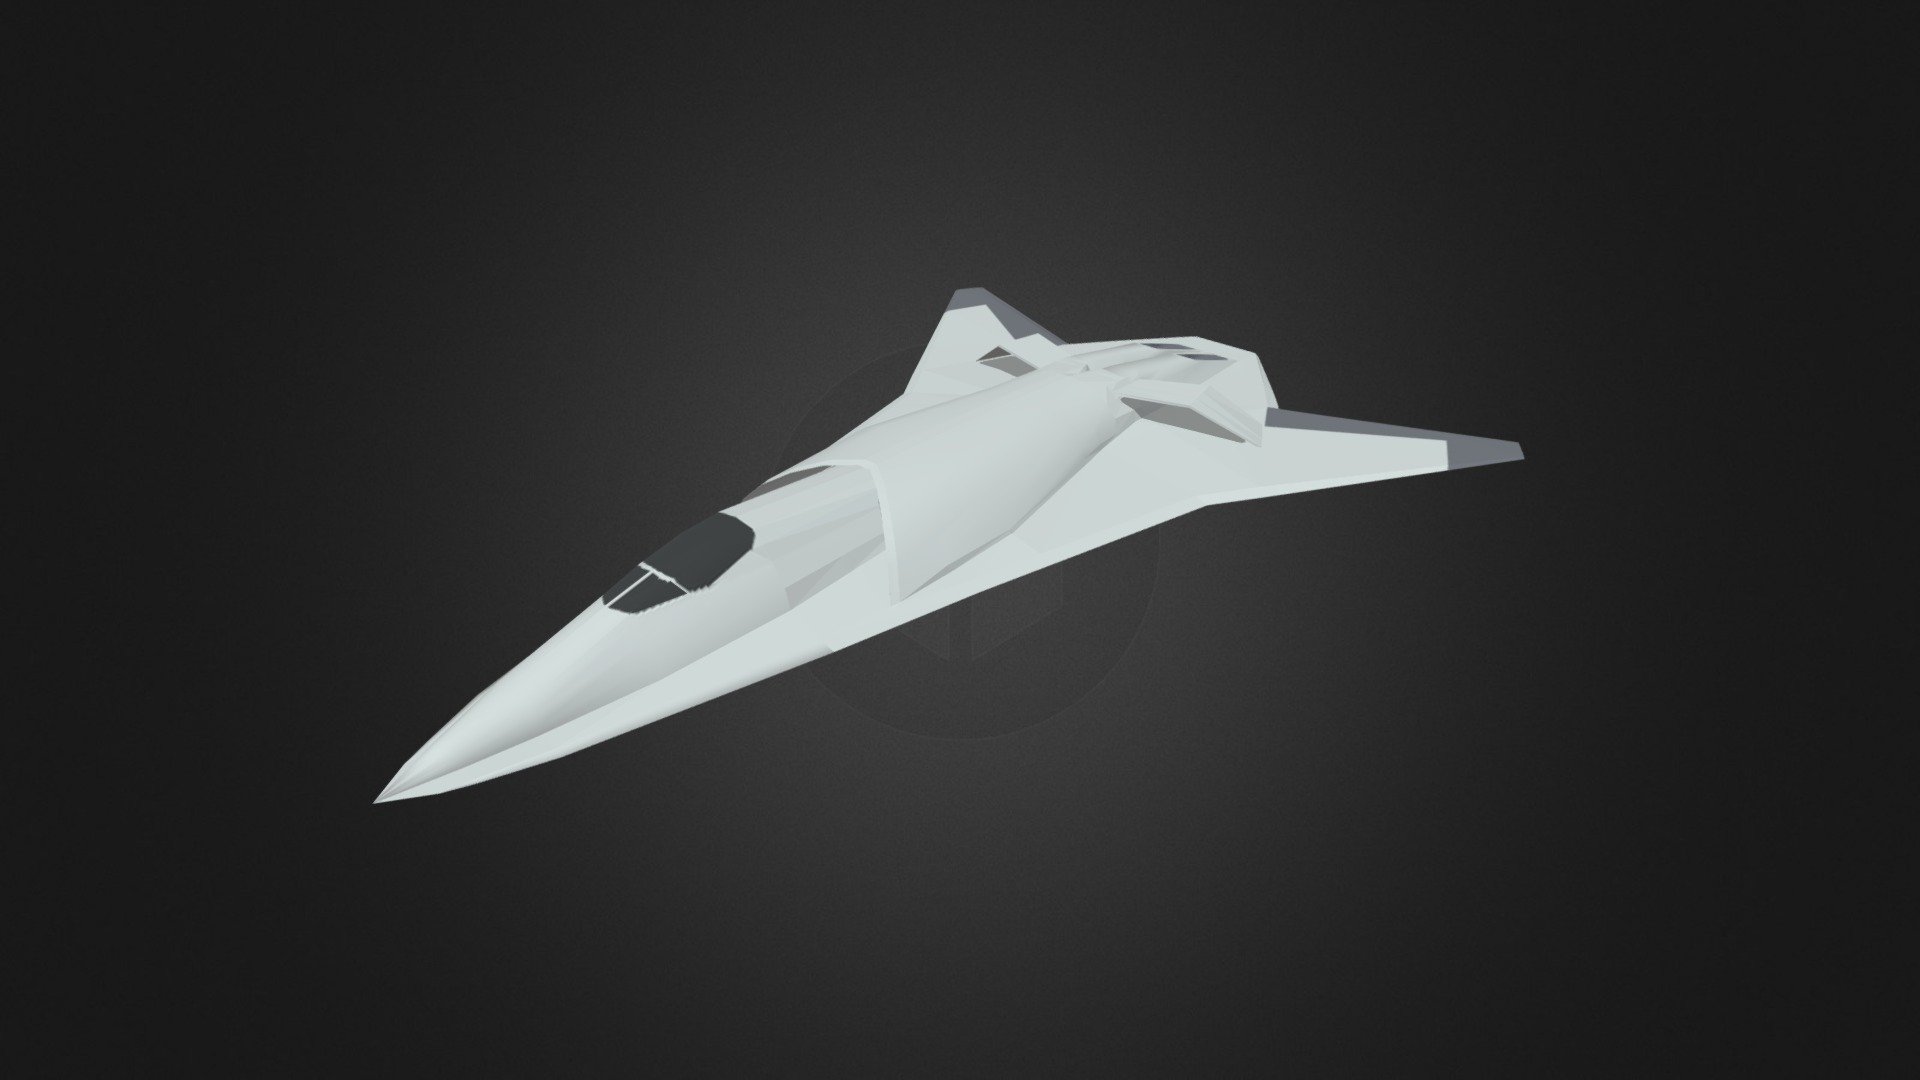 European 6th generation fighter jet concept. Created in 3ds Max.

615 Vertices and 565 Polygons.

1080x1080 texture.

File format: MAX, FBX and OBJ 3d model